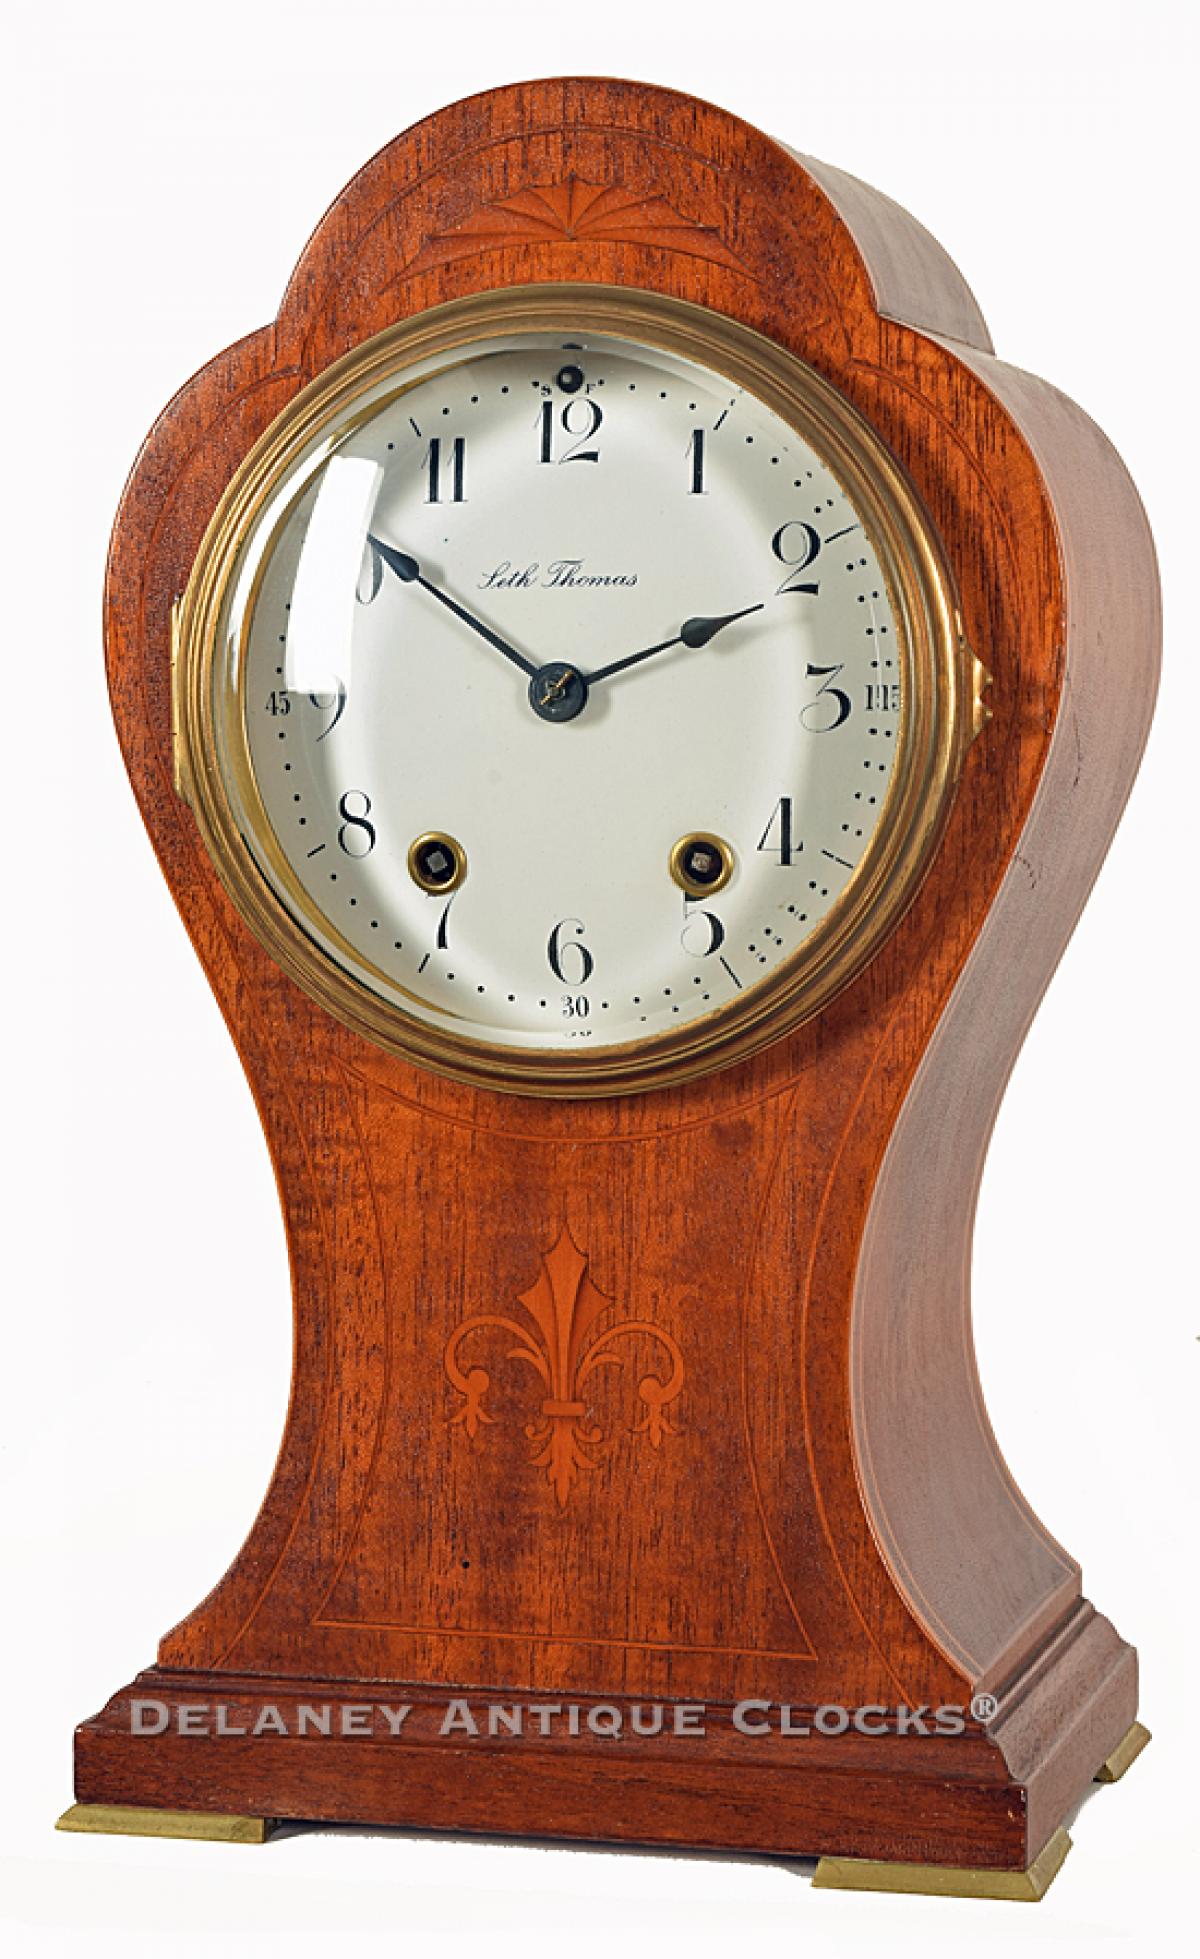 Antique Mantel Clocks: A Guide to These Timeless Treasures